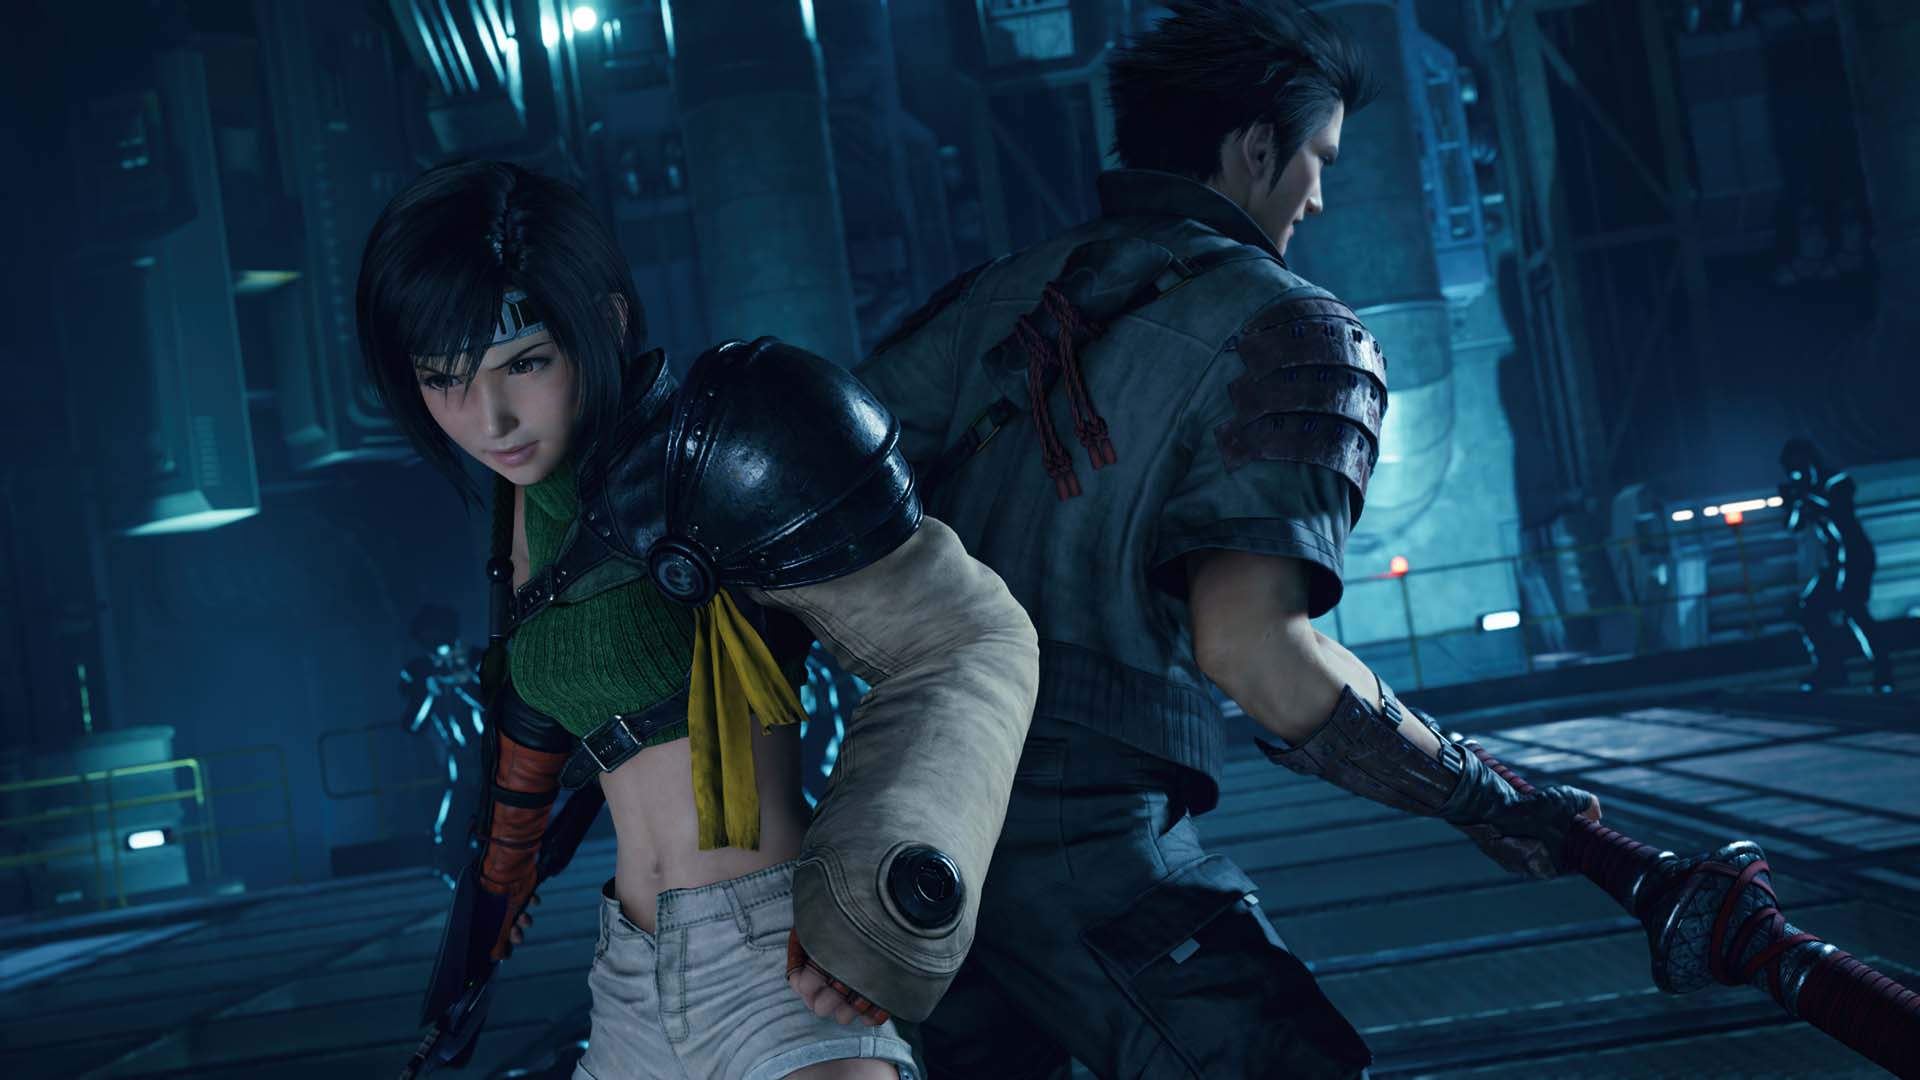 Final Fantasy VII Remake - EPISODE INTERmission (New Story Content Featuring Yuffie) DLC EU PS5 CD Key, 11.29 usd